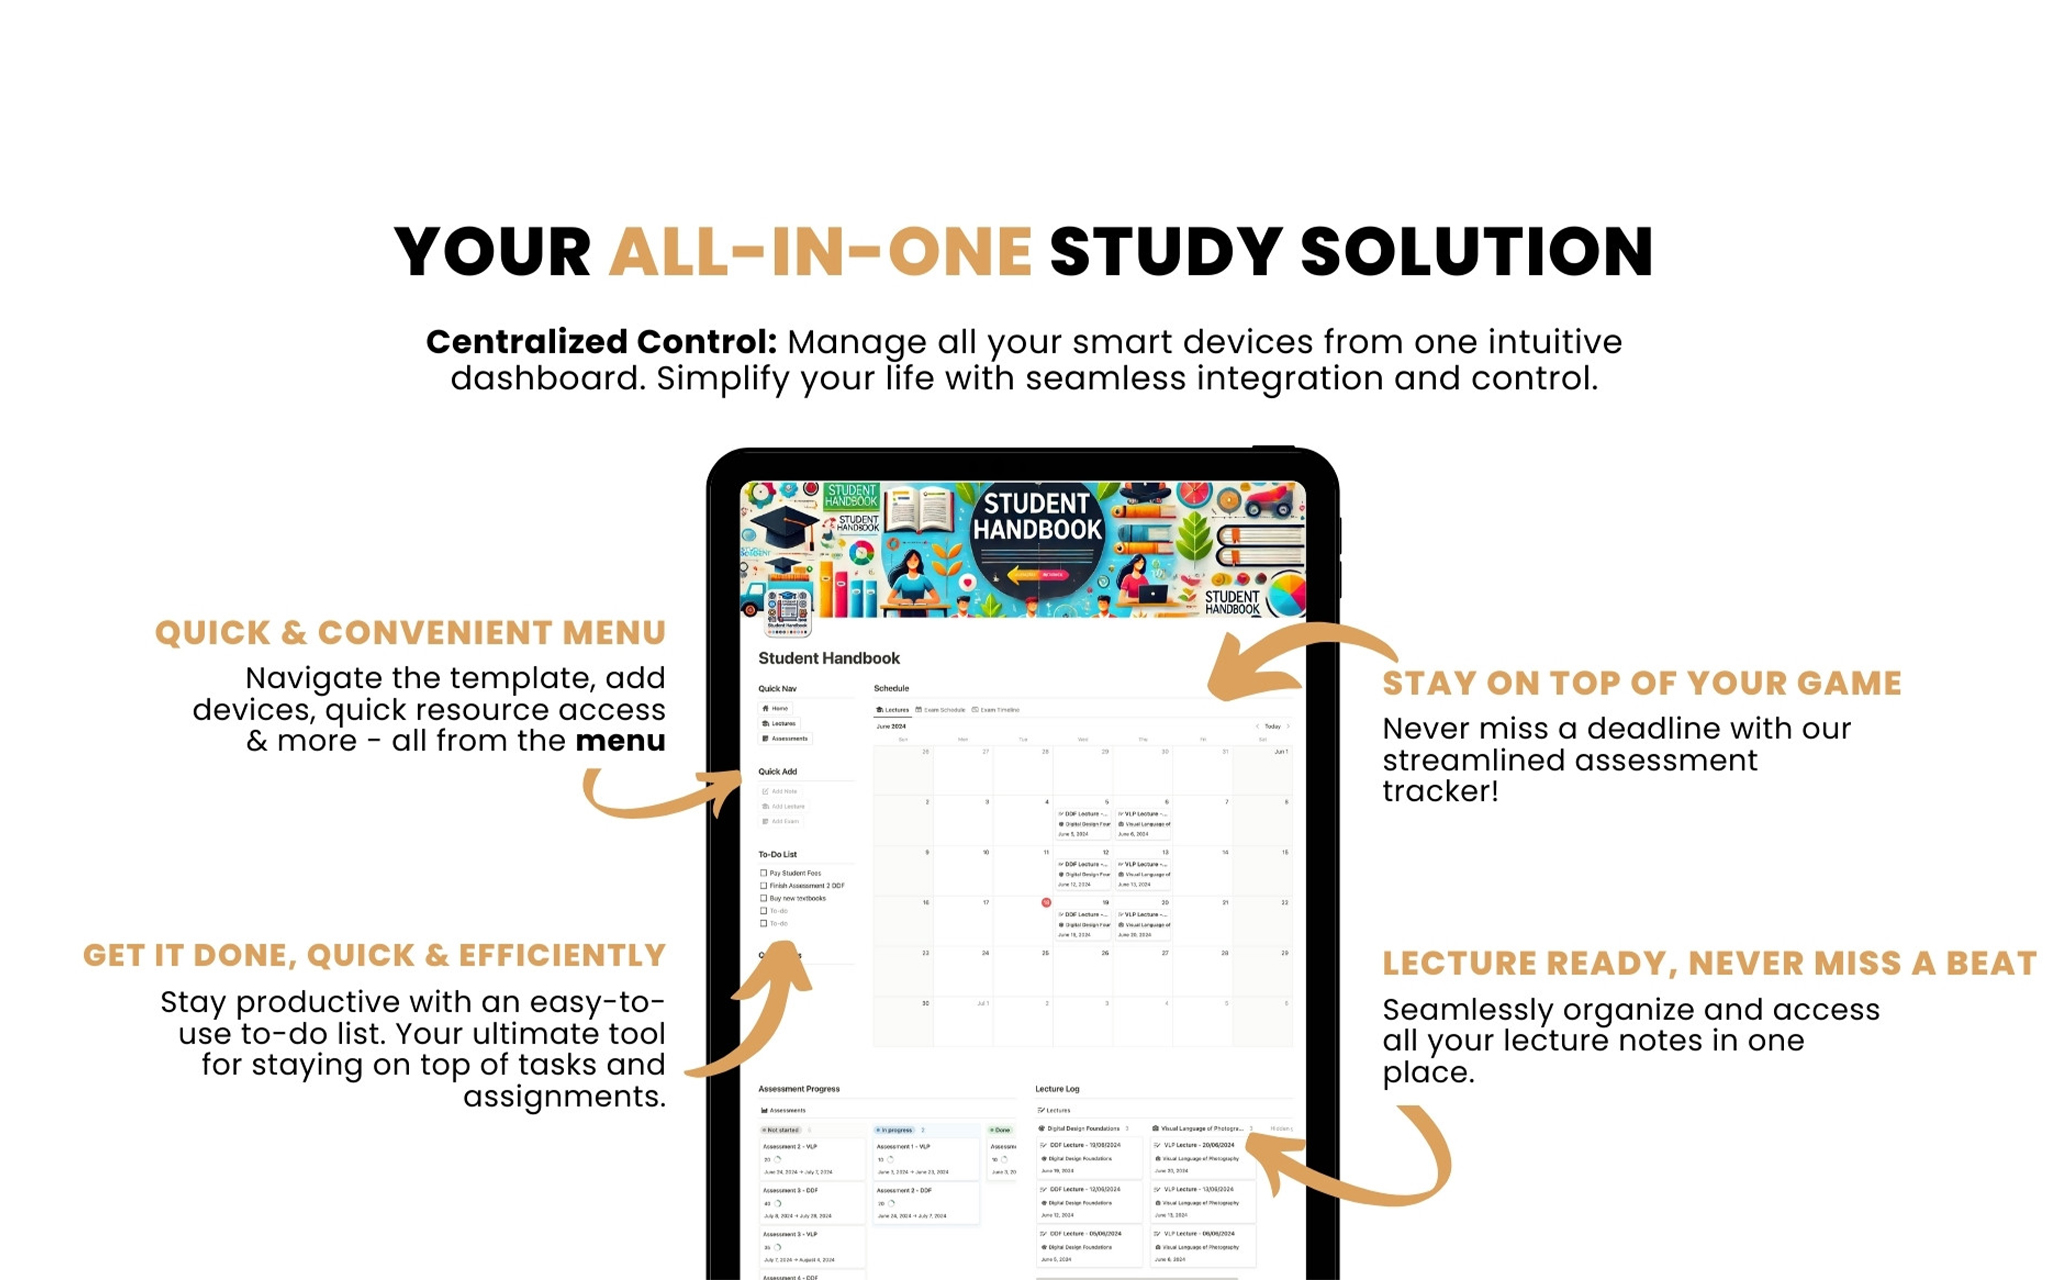 This all-in-one digital planner is designed specifically for students at school or university/college who want to take control of their academic life and excel in their studies. With our Student Handbook, you can transform your study routine, stay organized & achieve your goals!